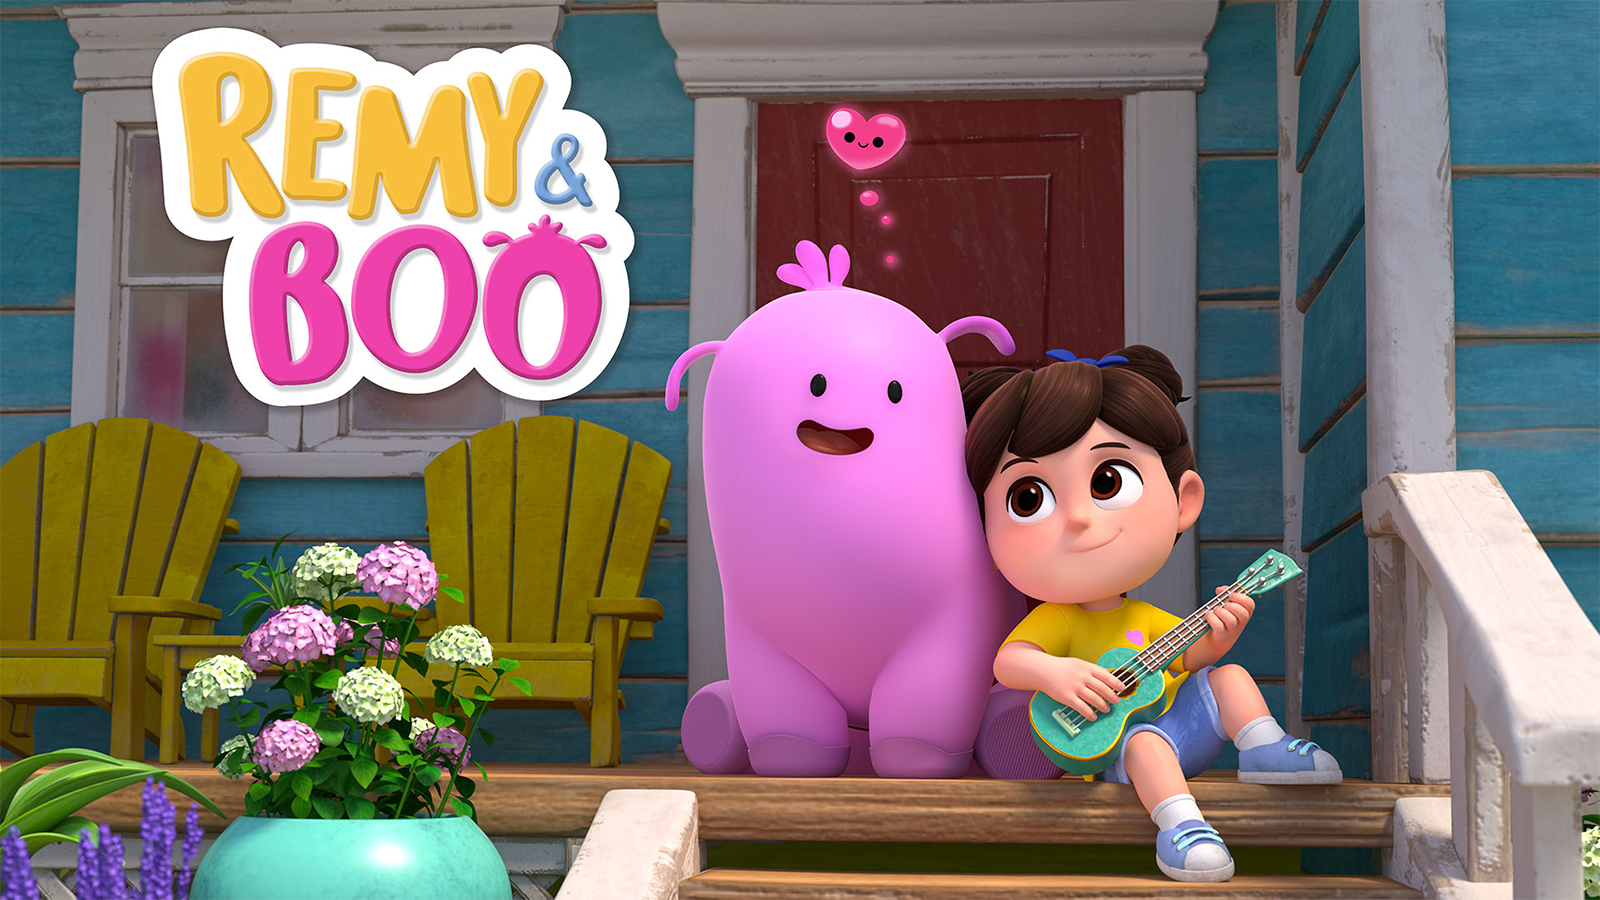 remy-boo-nov-2020-show-image.png